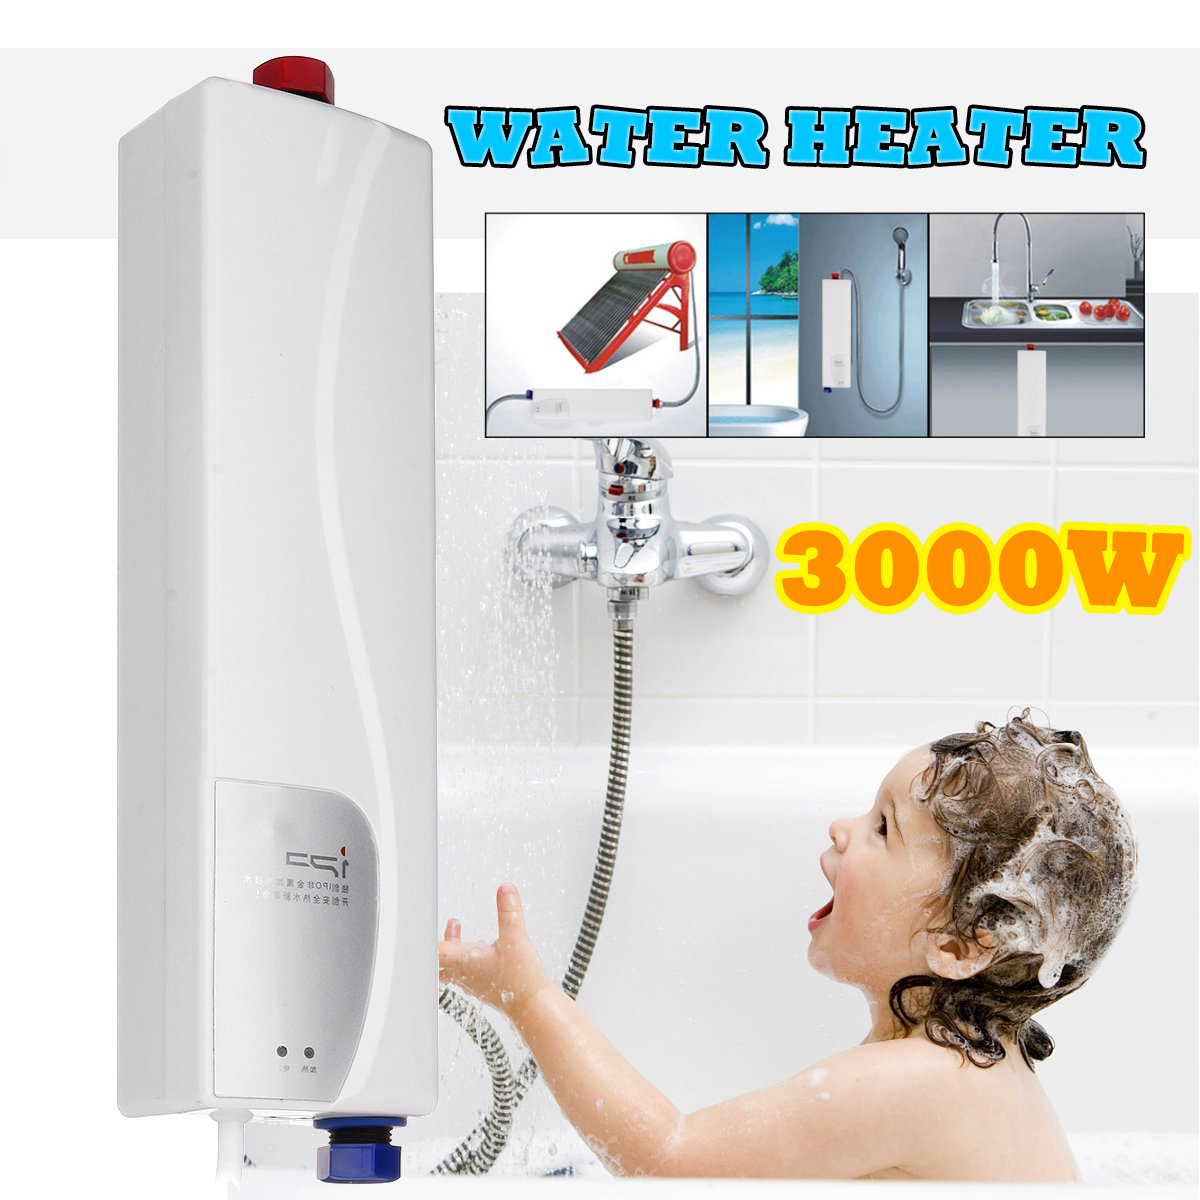 3000W-220V-Portable-Mini-Tankless-Electric-Shower-Instant-Kitchen-Bathroom-Water-Heater-1569932-1